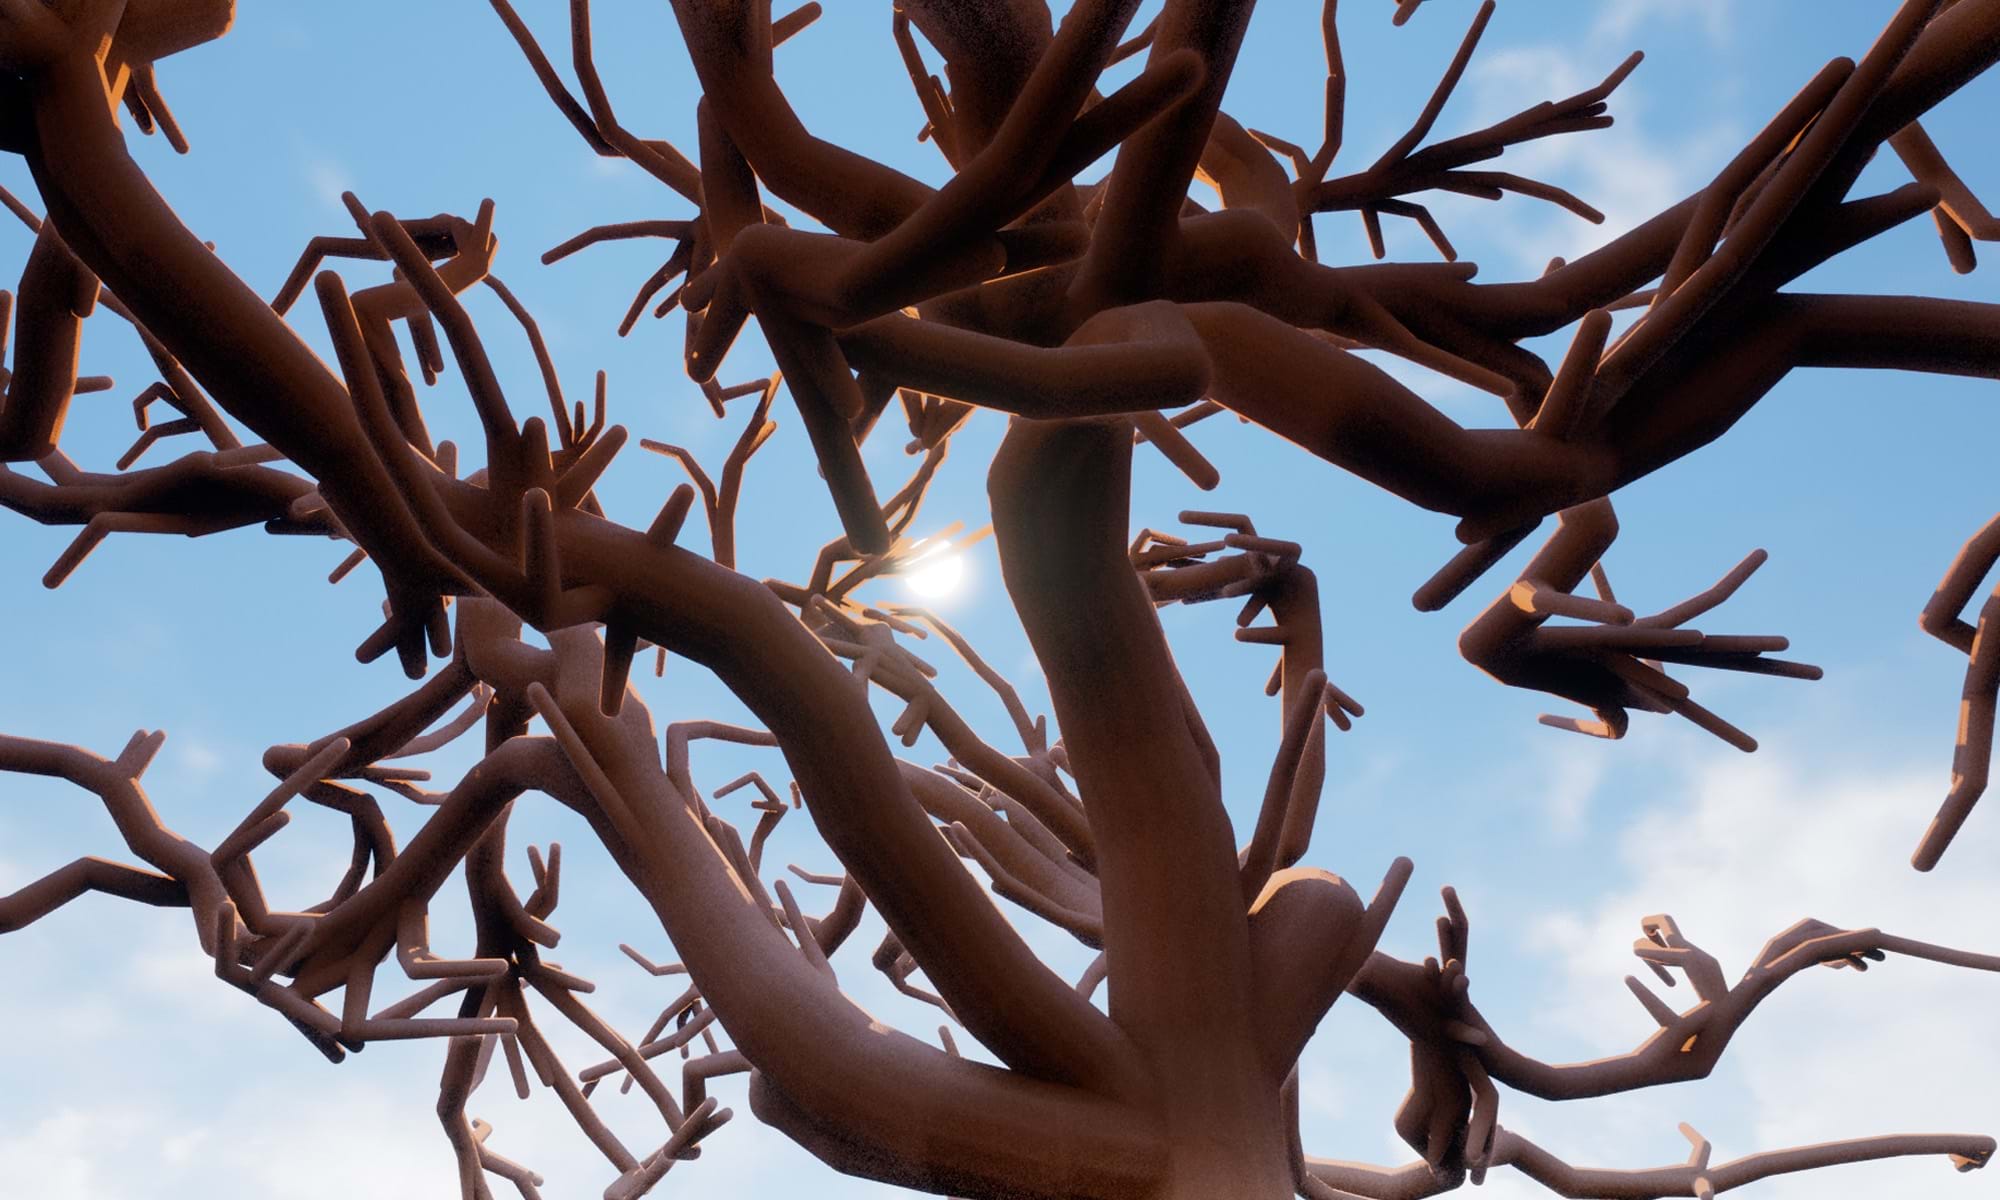 'Procedurally generating, environmentally responsive trees.' is a 2023 Digital Graduate Show project by Stylianos Zachariou, a Computer Game Applications Development student at Abertay University.